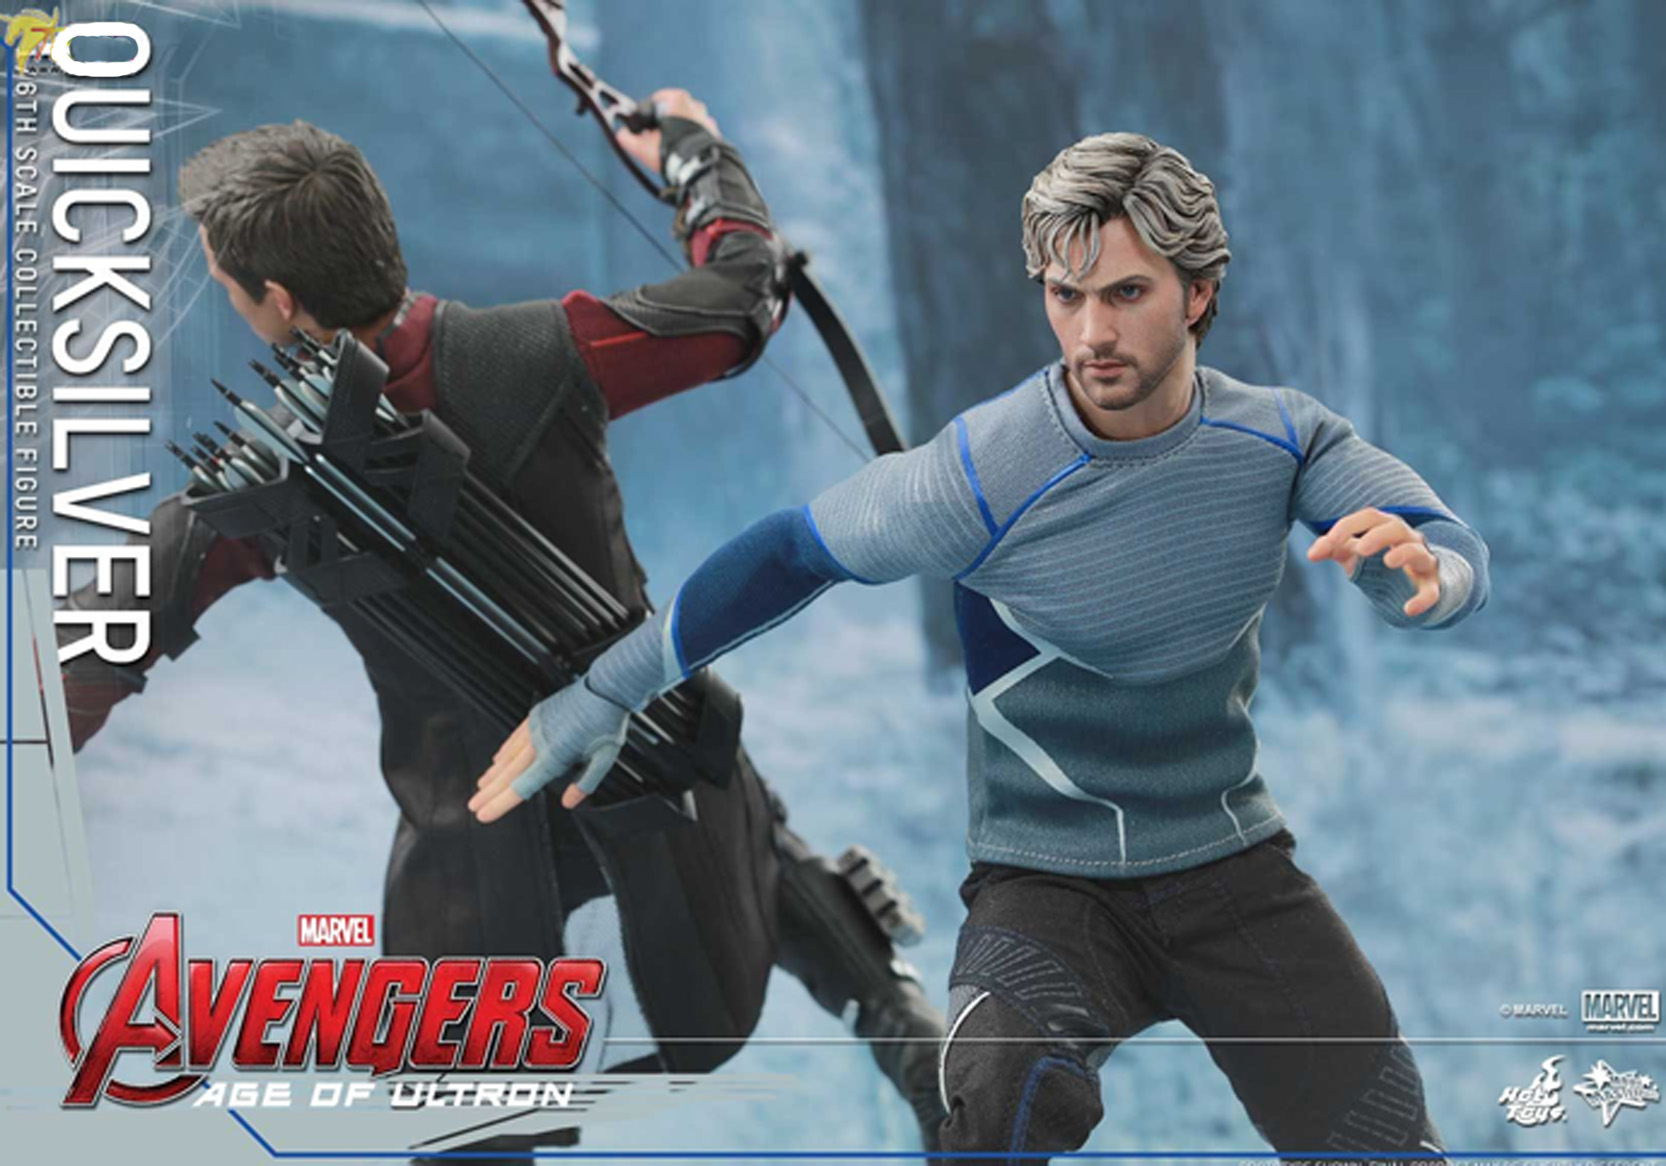 Avengers: Age of Ultron Cosplay Costume Quicksilver Costume